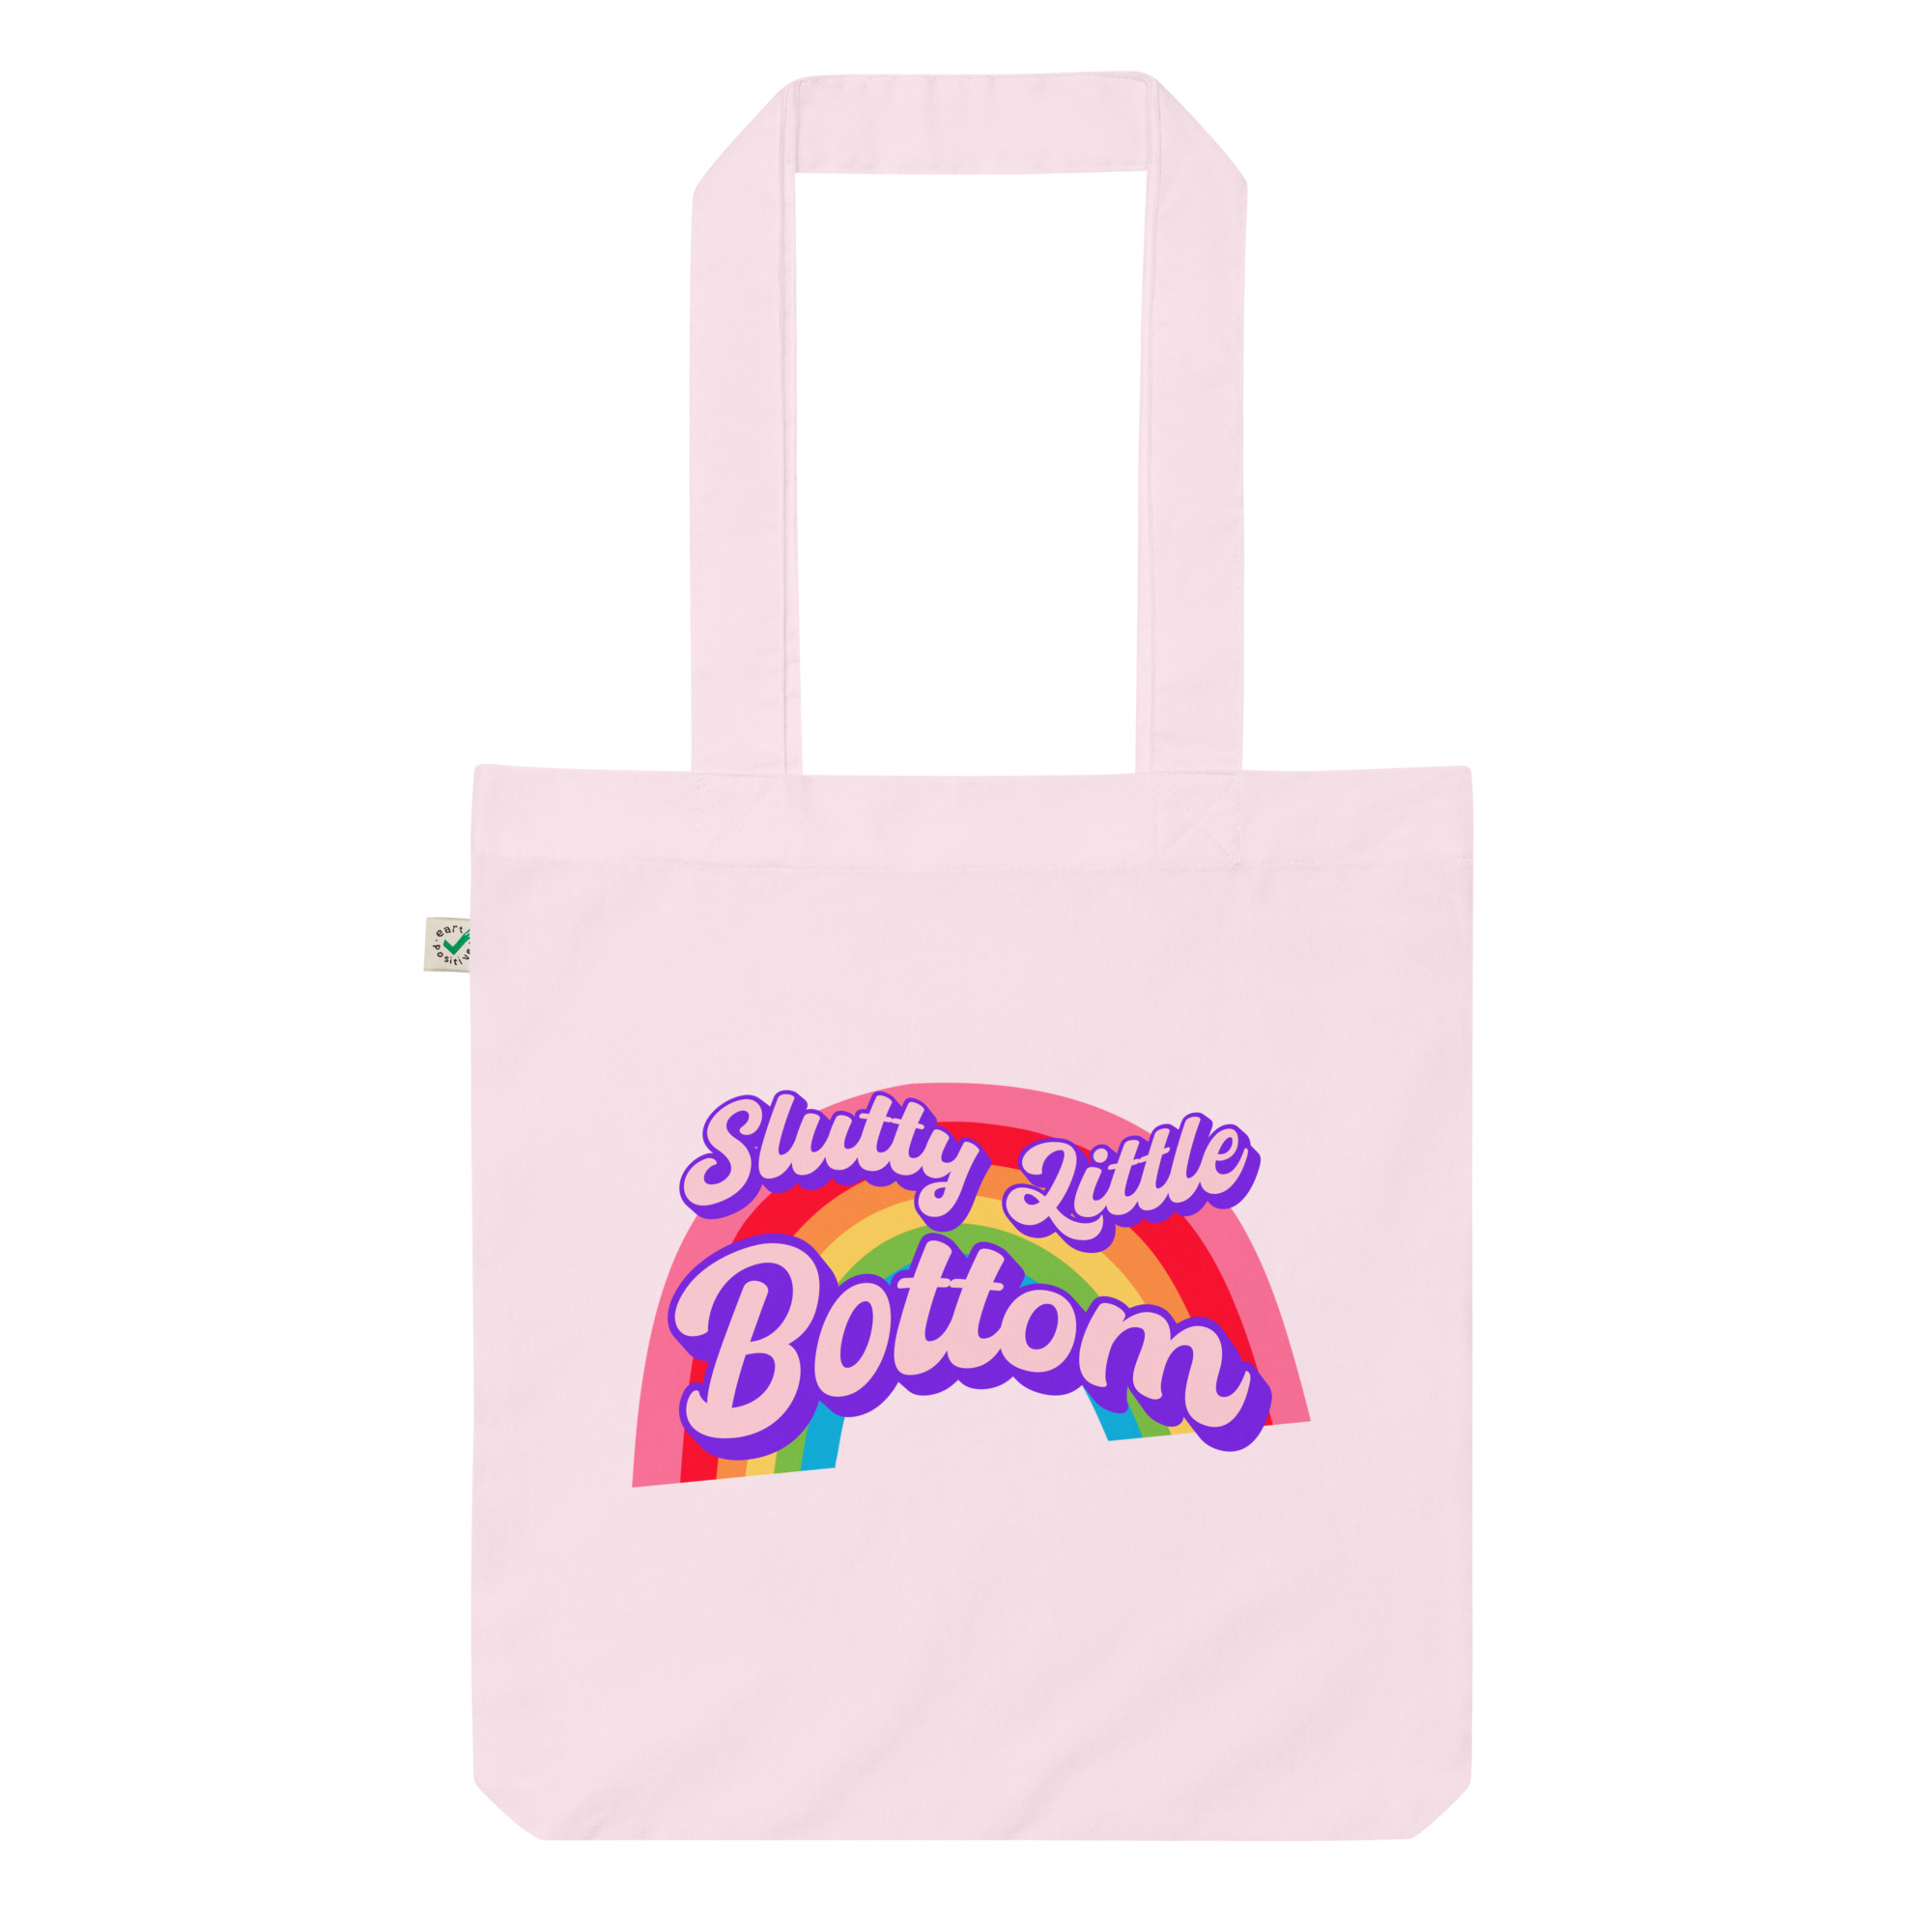 Featured image for “Slutty Little Bottom - Organic fashion tote bag”